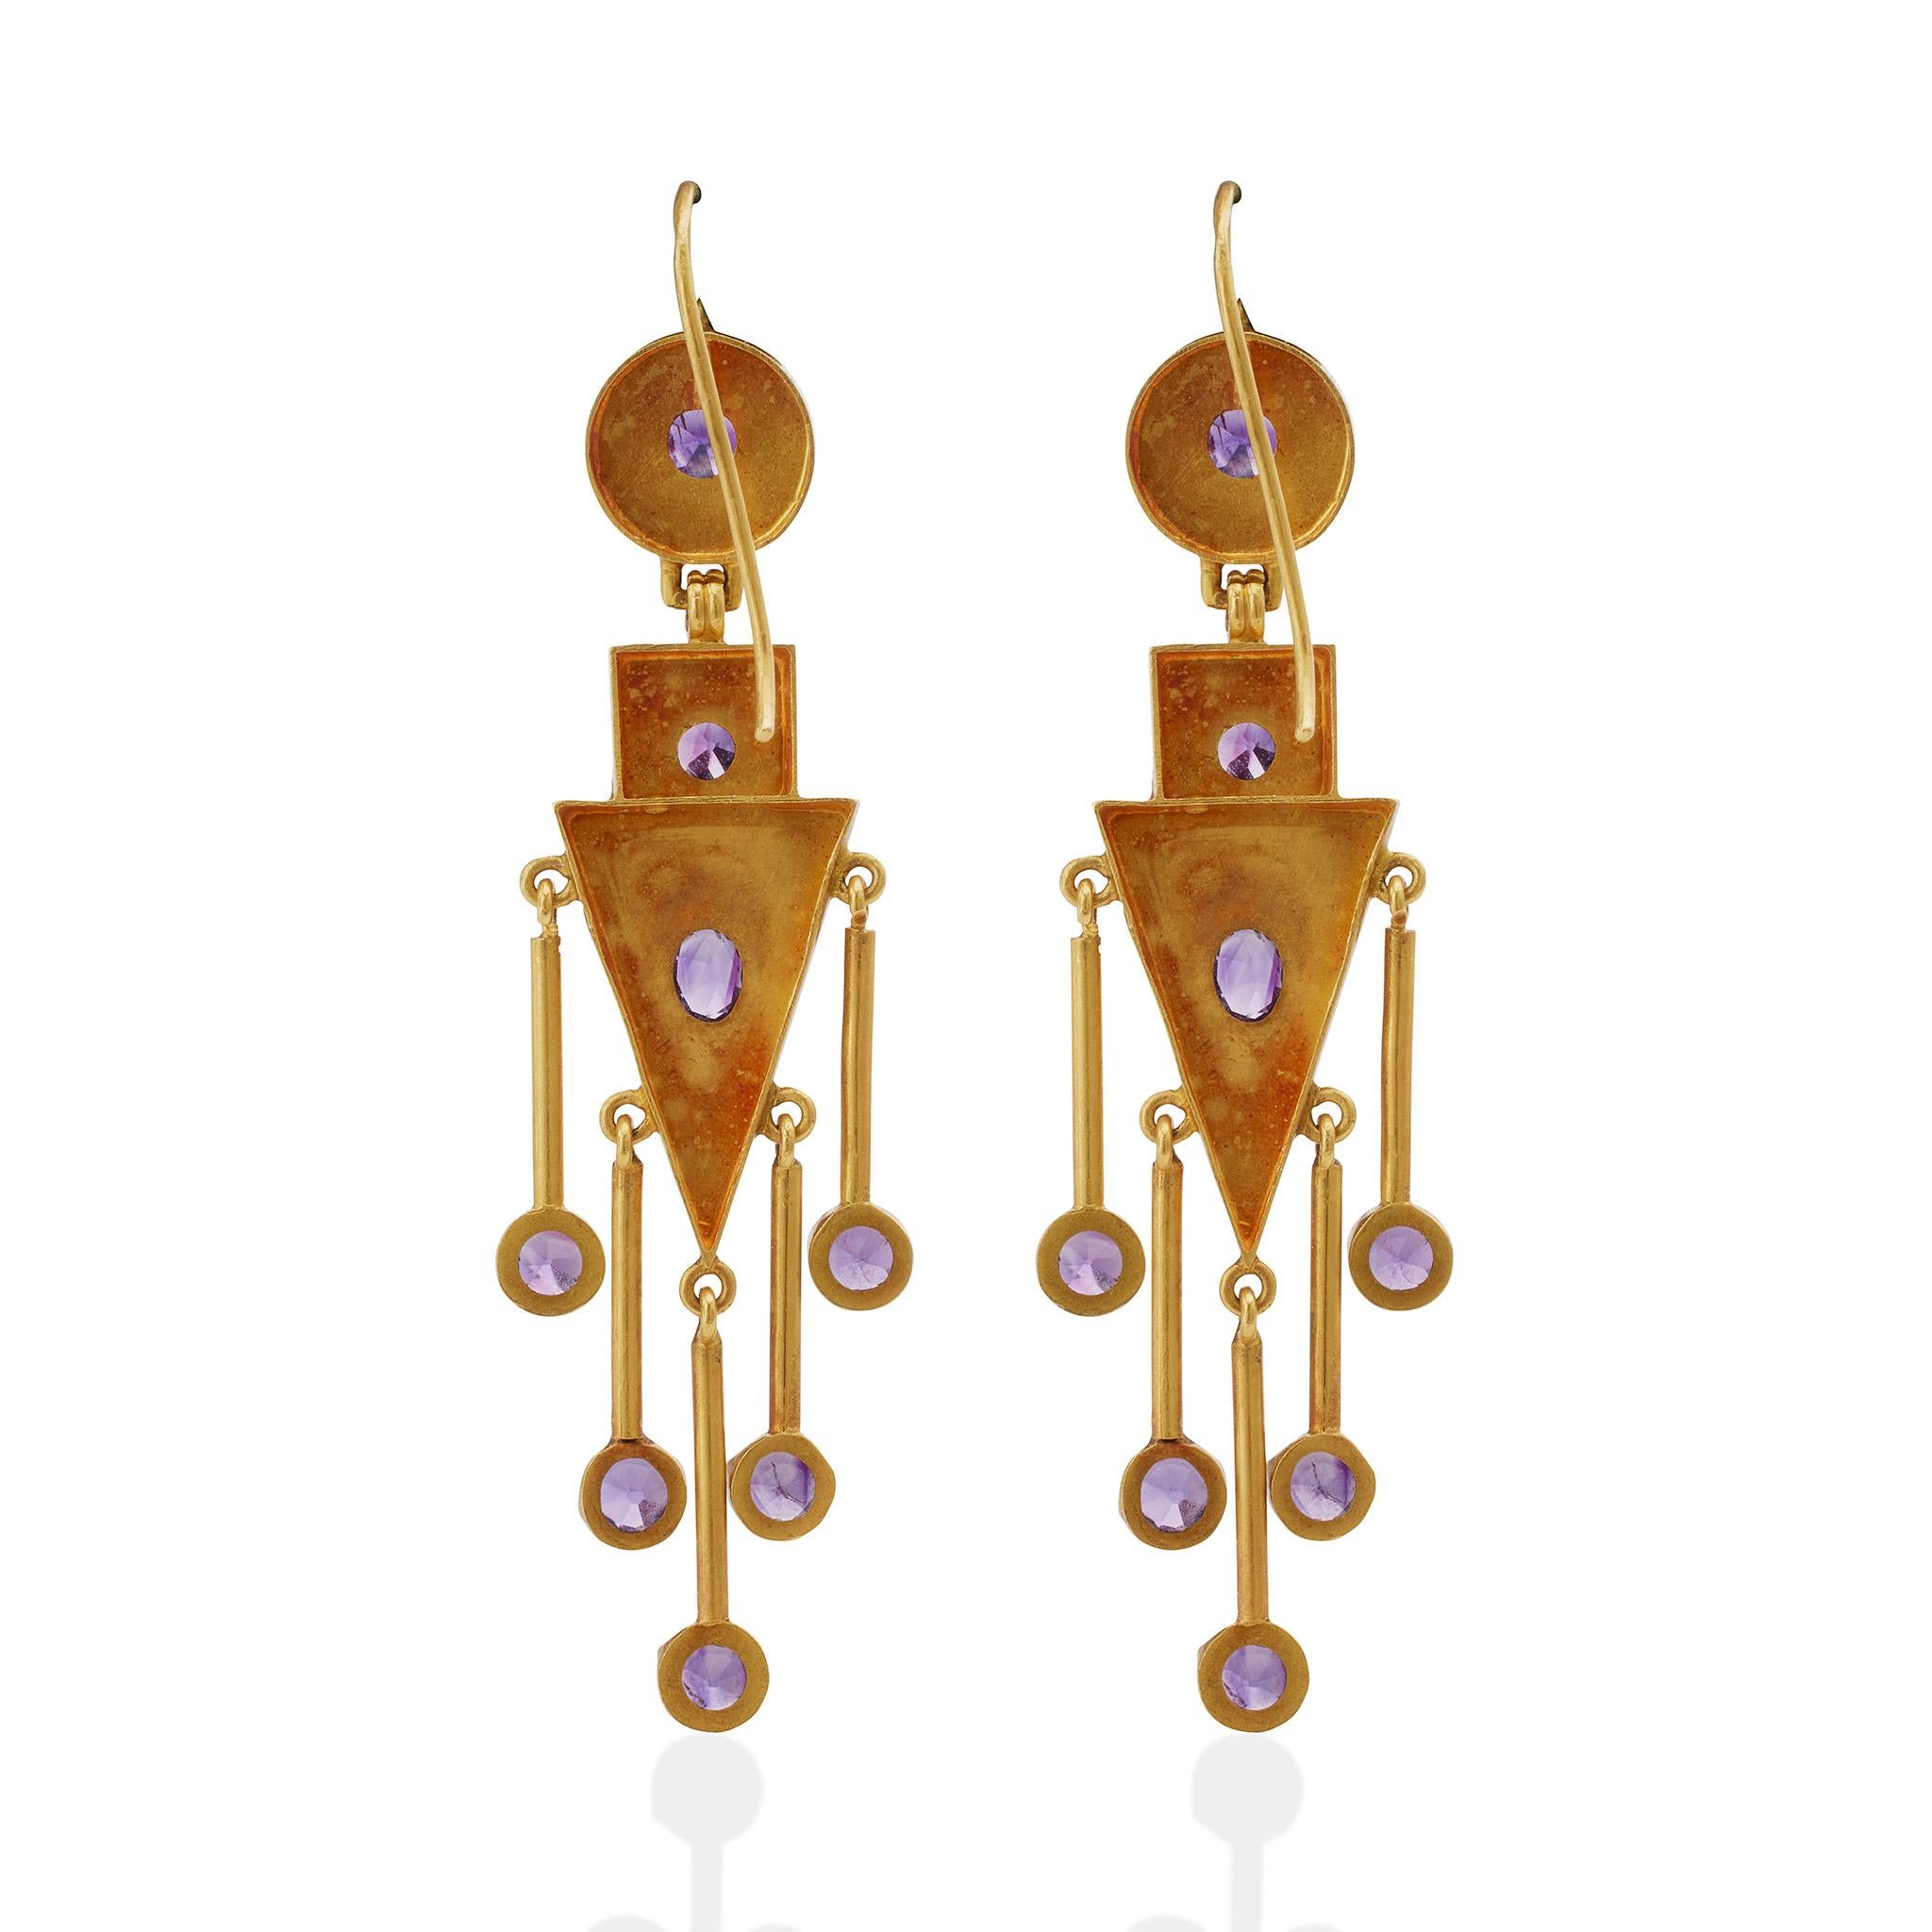 Created circa the 1860s, these antique 18K gold Italian fringe pendant earrings are set with amethysts. The flexible pendant earrings in the archaeological style are designed as circular tops suspending rectangular and triangular shaped plaques